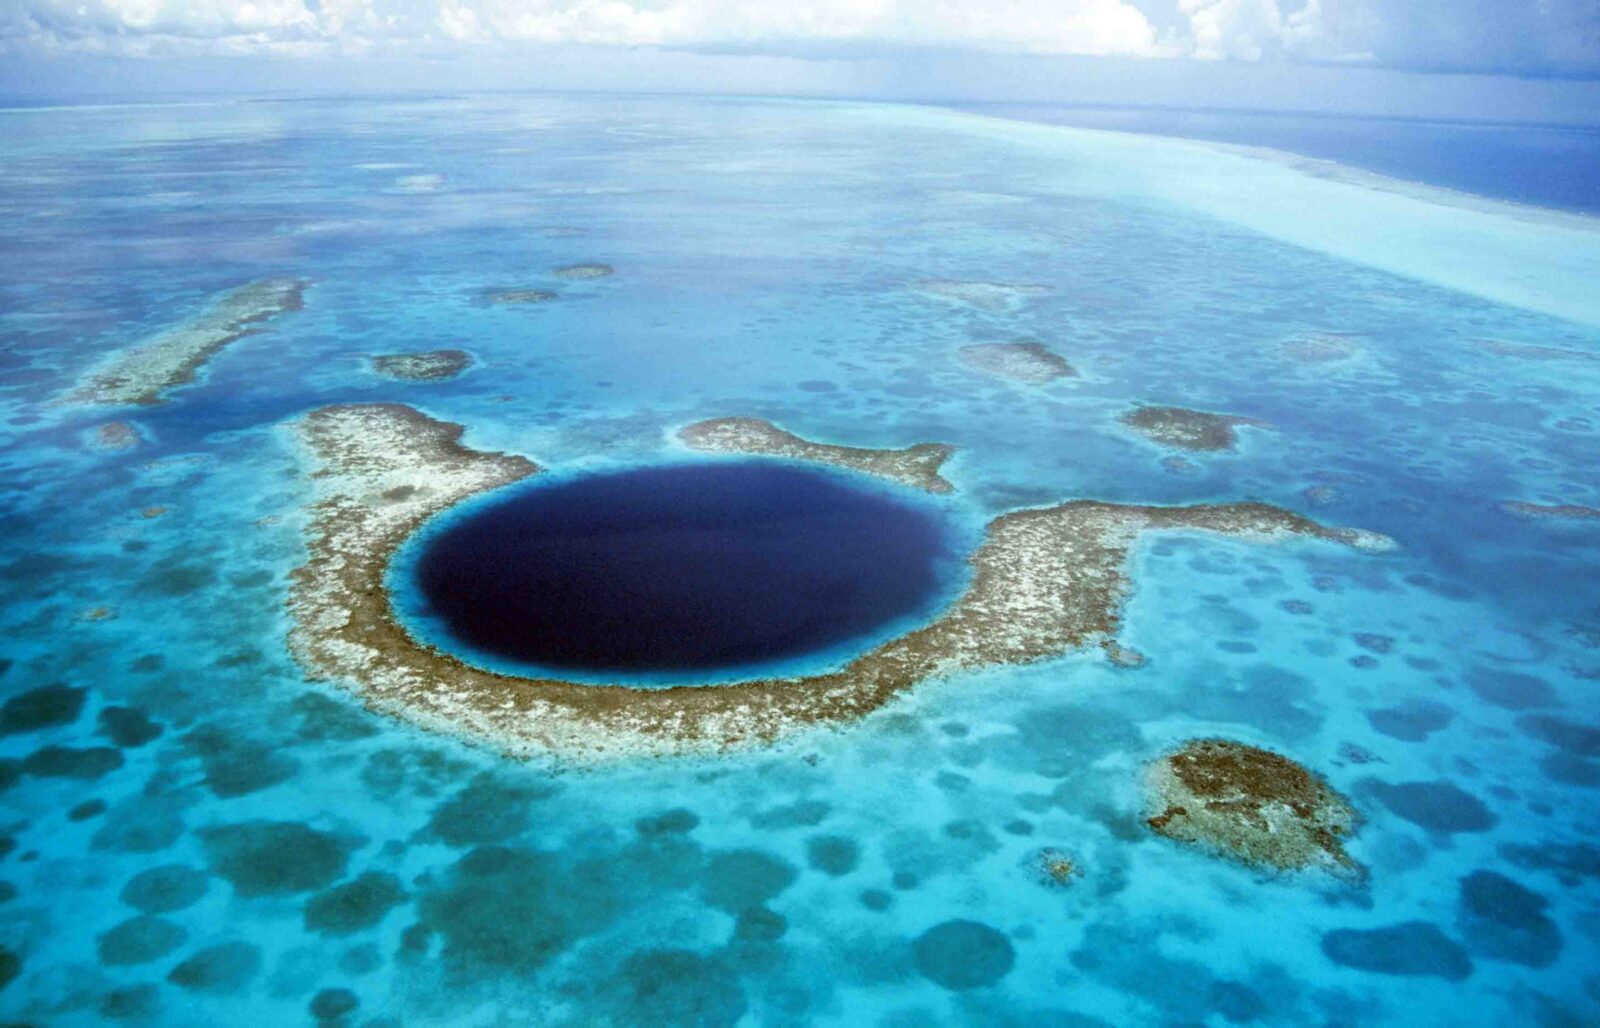 Can You Match These Extraordinary Natural Features to Their Respective Countries? Great Blue Hole, Belize Barrier Reef